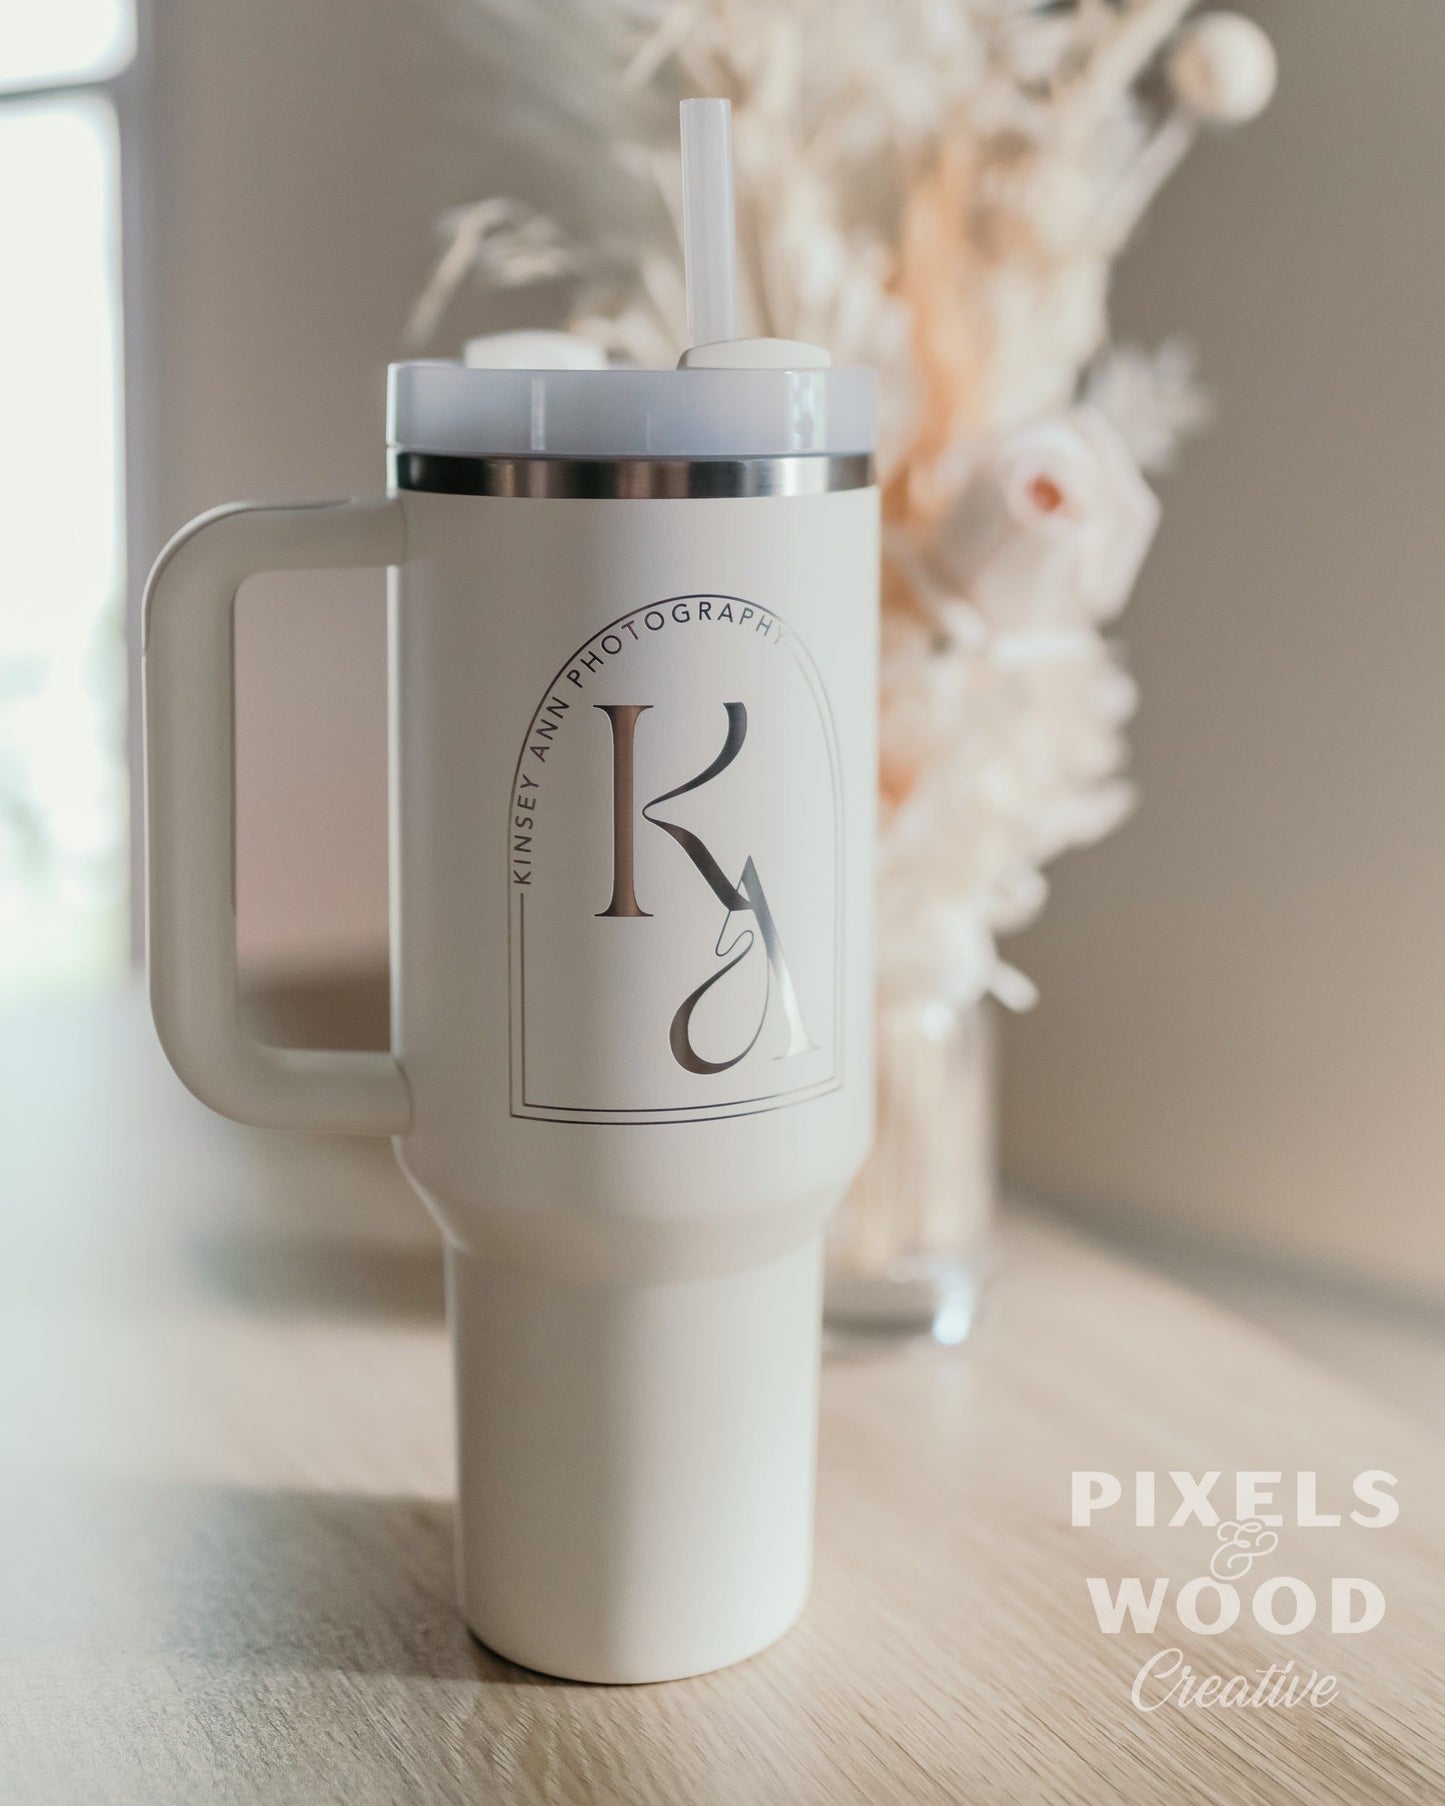 Personalized Engraved Stanley Tumbler – Sunny Box